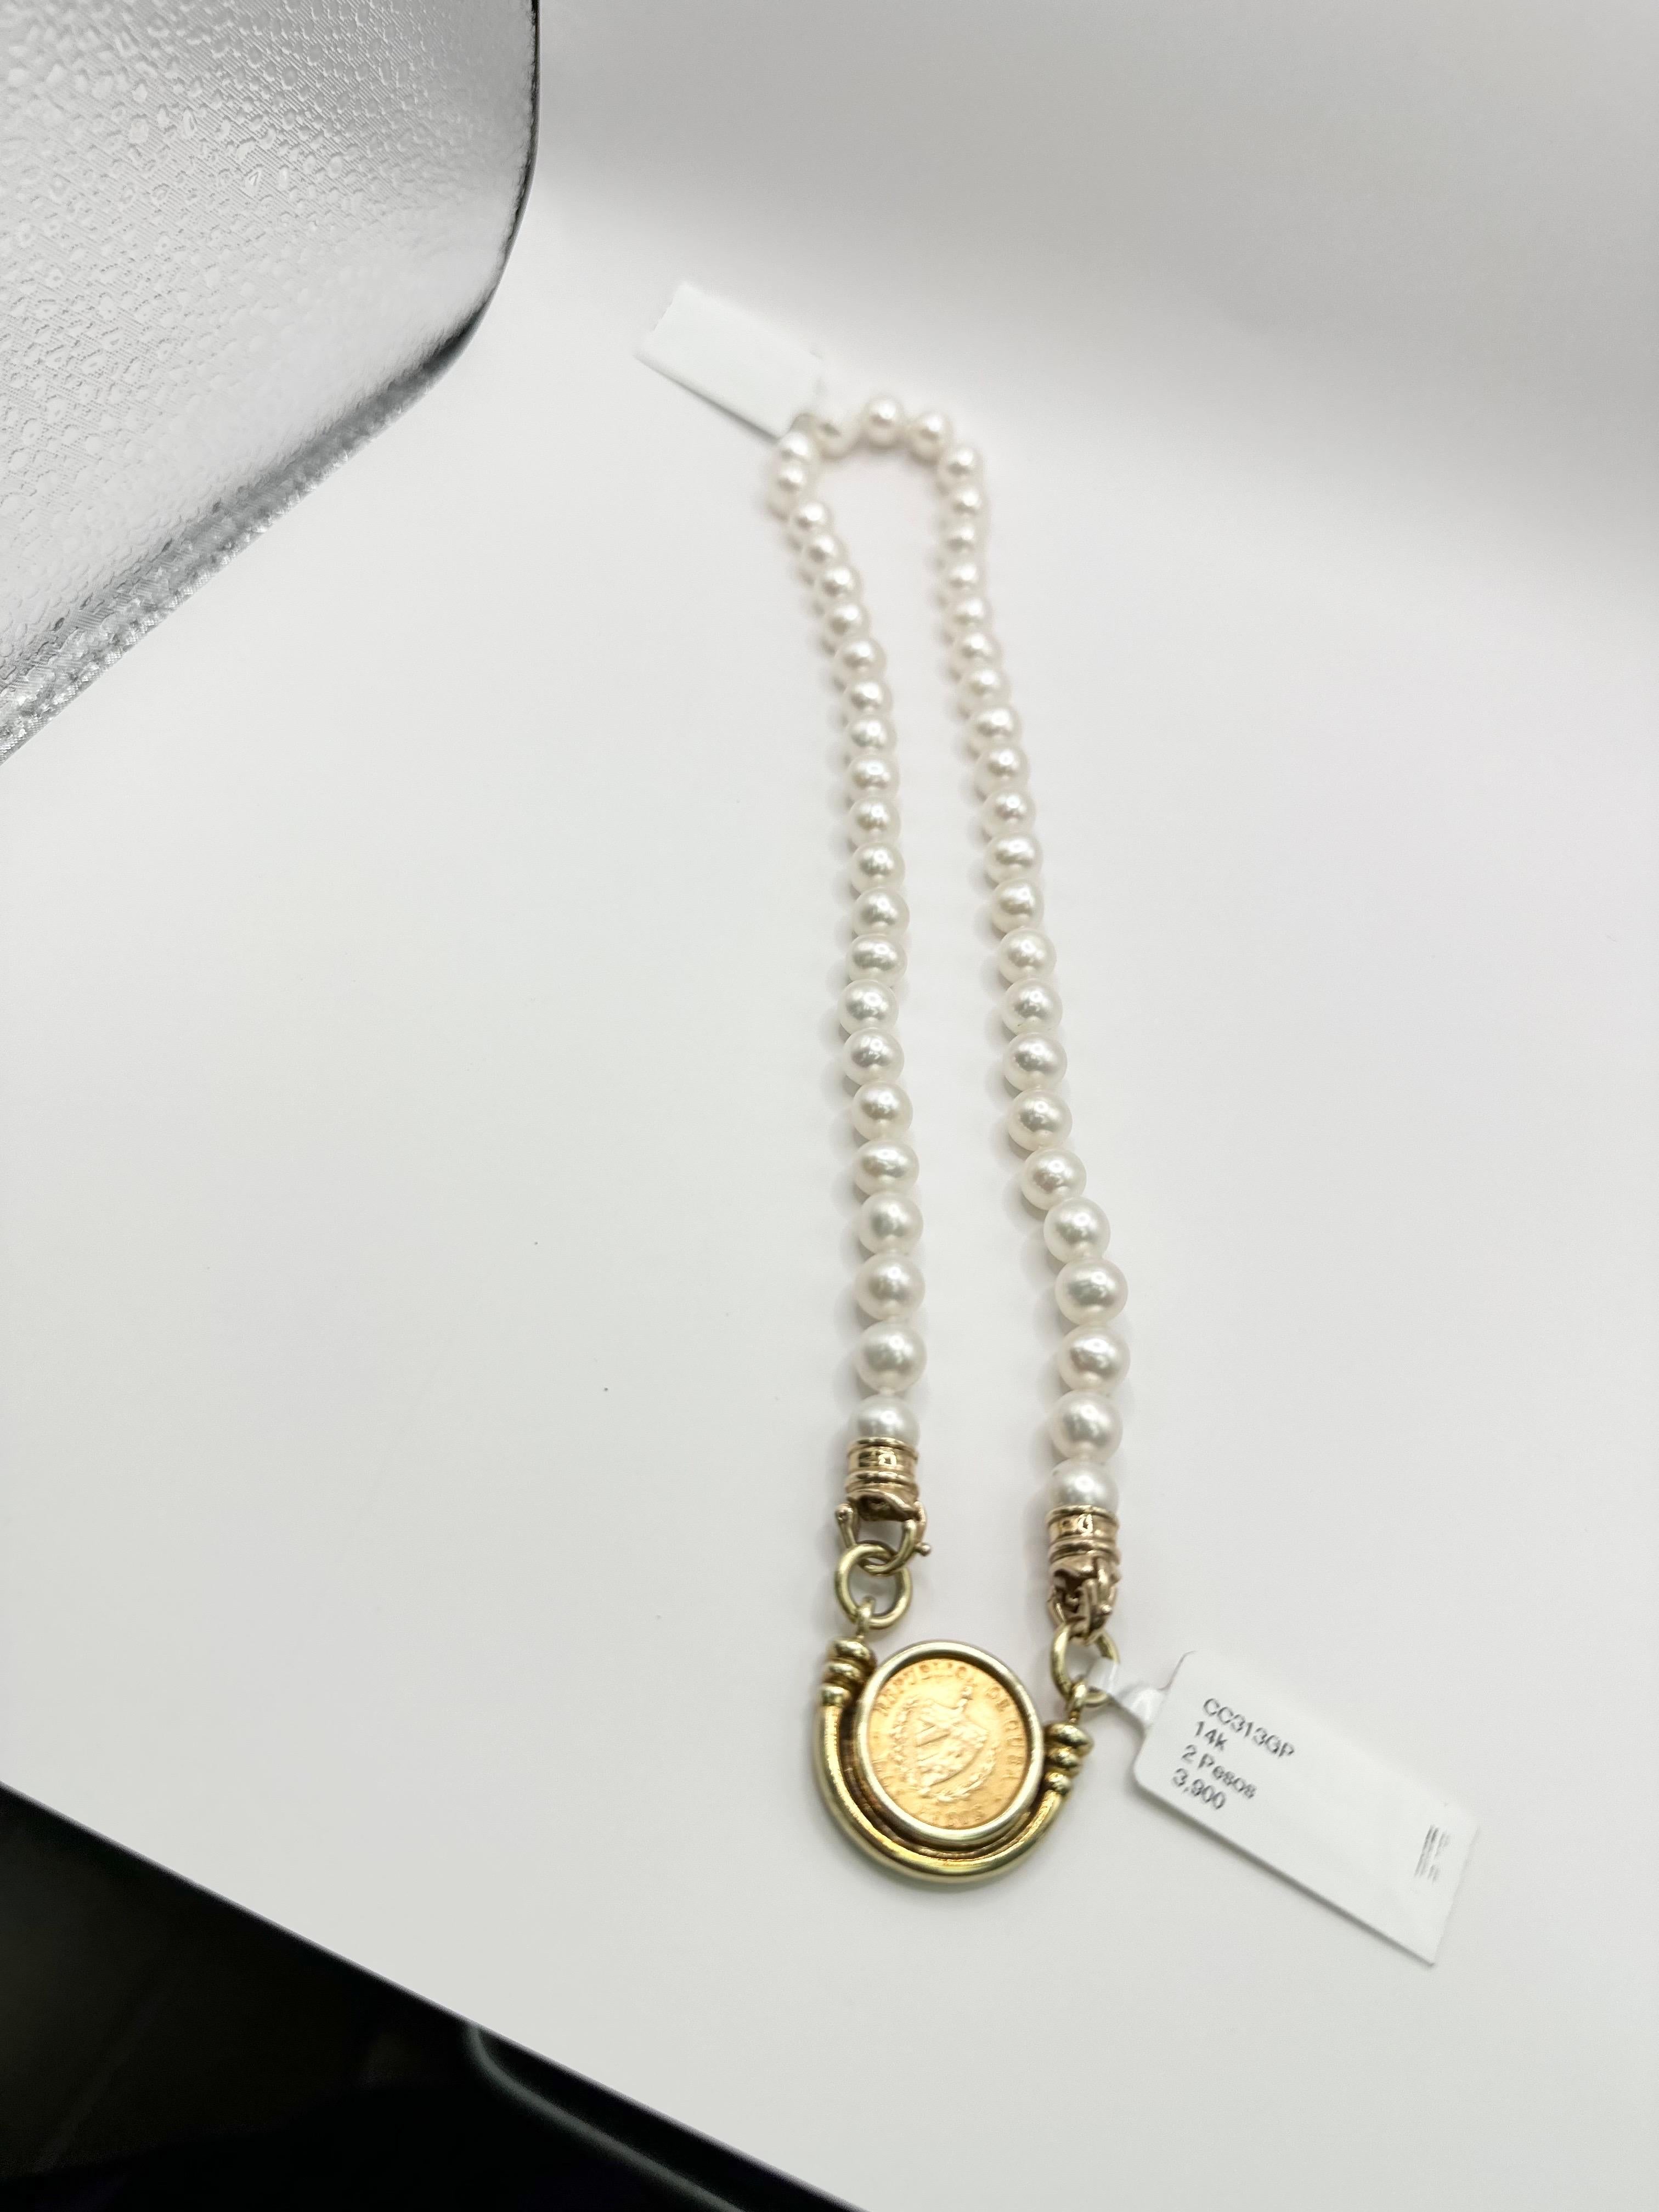 Unique coin necklace with natural pearls, 2 Cuban pesos neckace in 14Kt solid gold! Chain is app. 17 inches!

Certificate of authenticity comes with purchase!

ABOUT US
We are a family-owned business. Our studio in located in the heart of Boca Raton